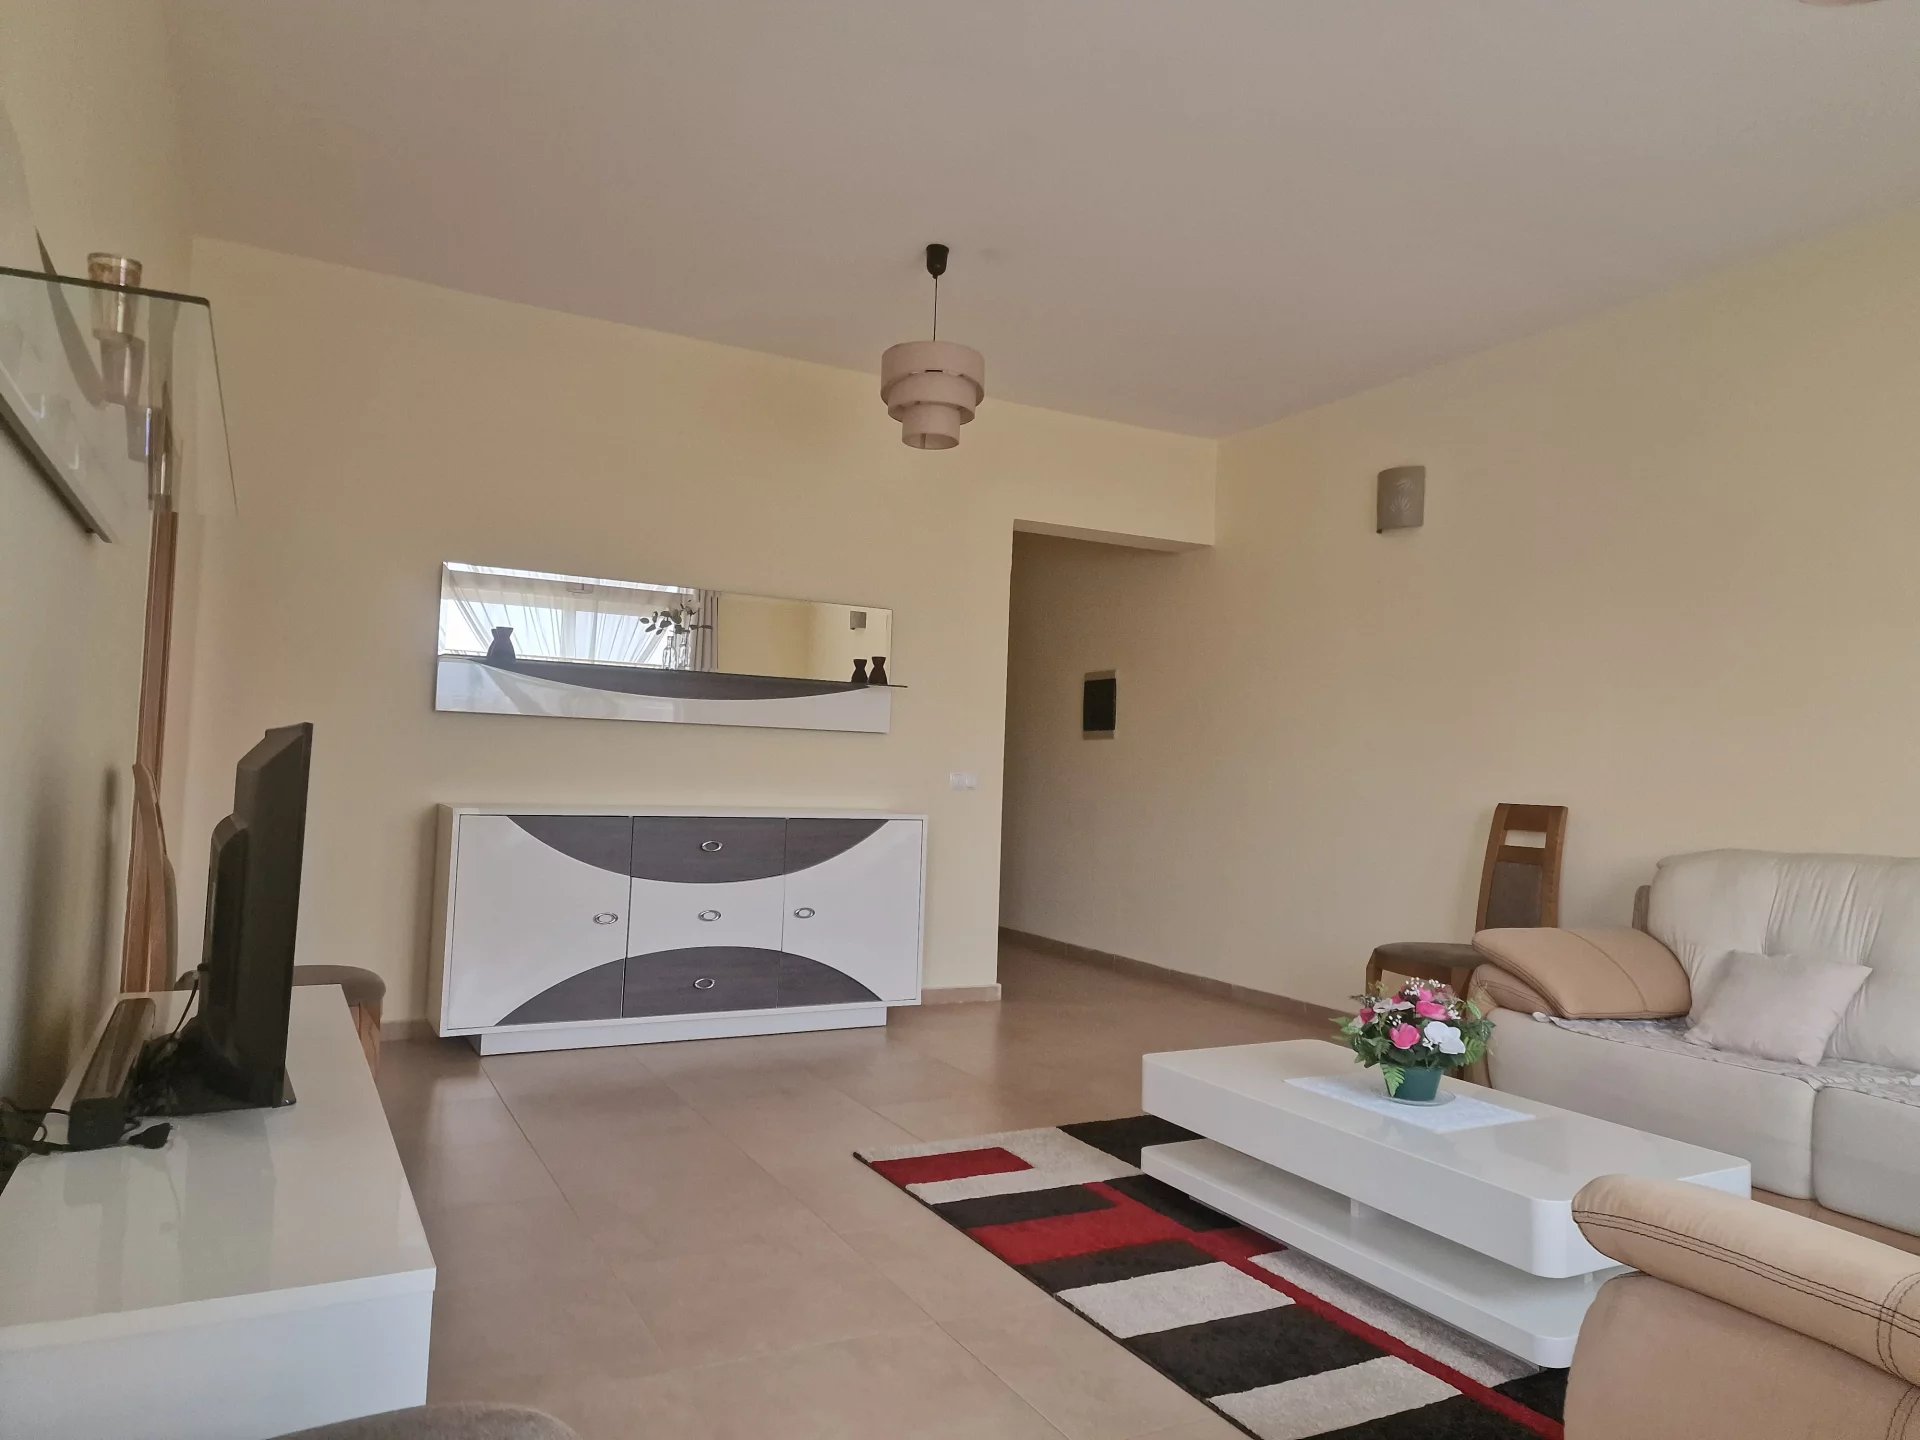 Flat to rent for your holidays in Praia